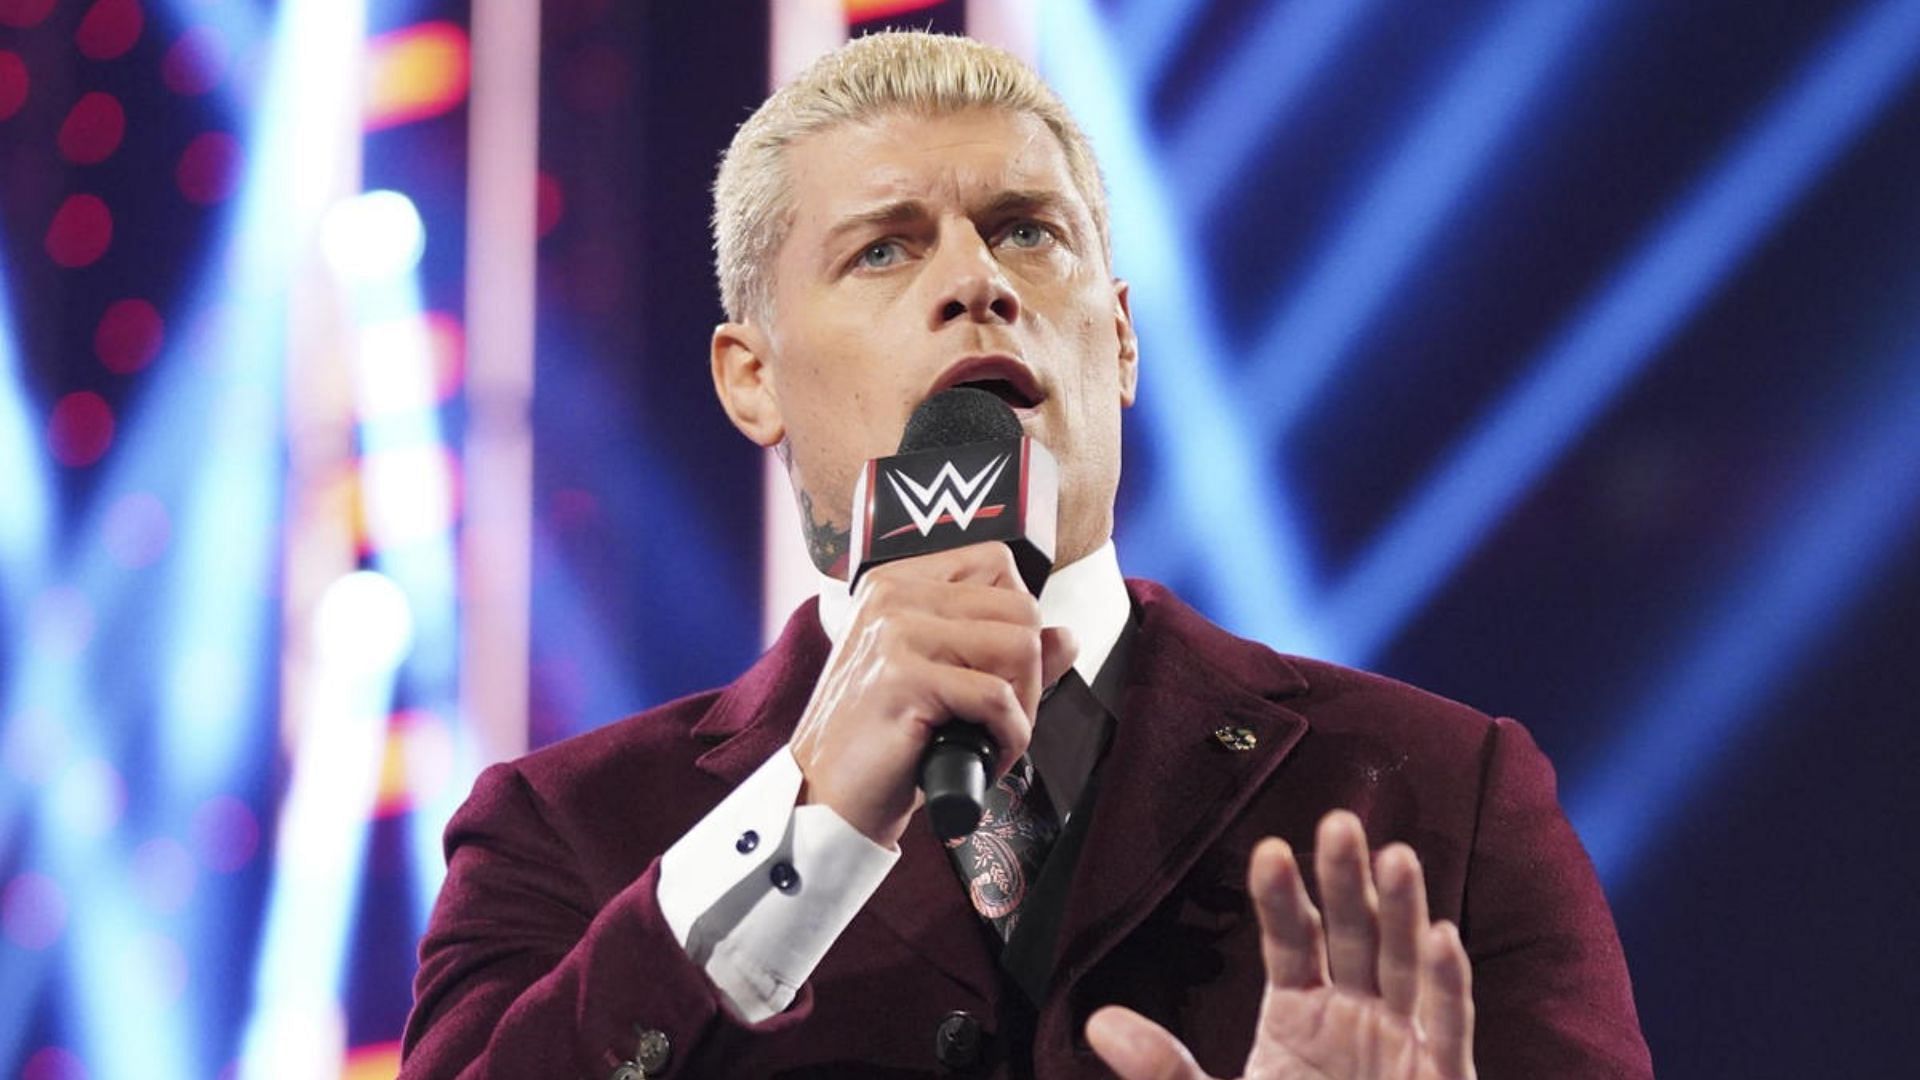 Will Cody Rhodes finish his story at WrestleMania?